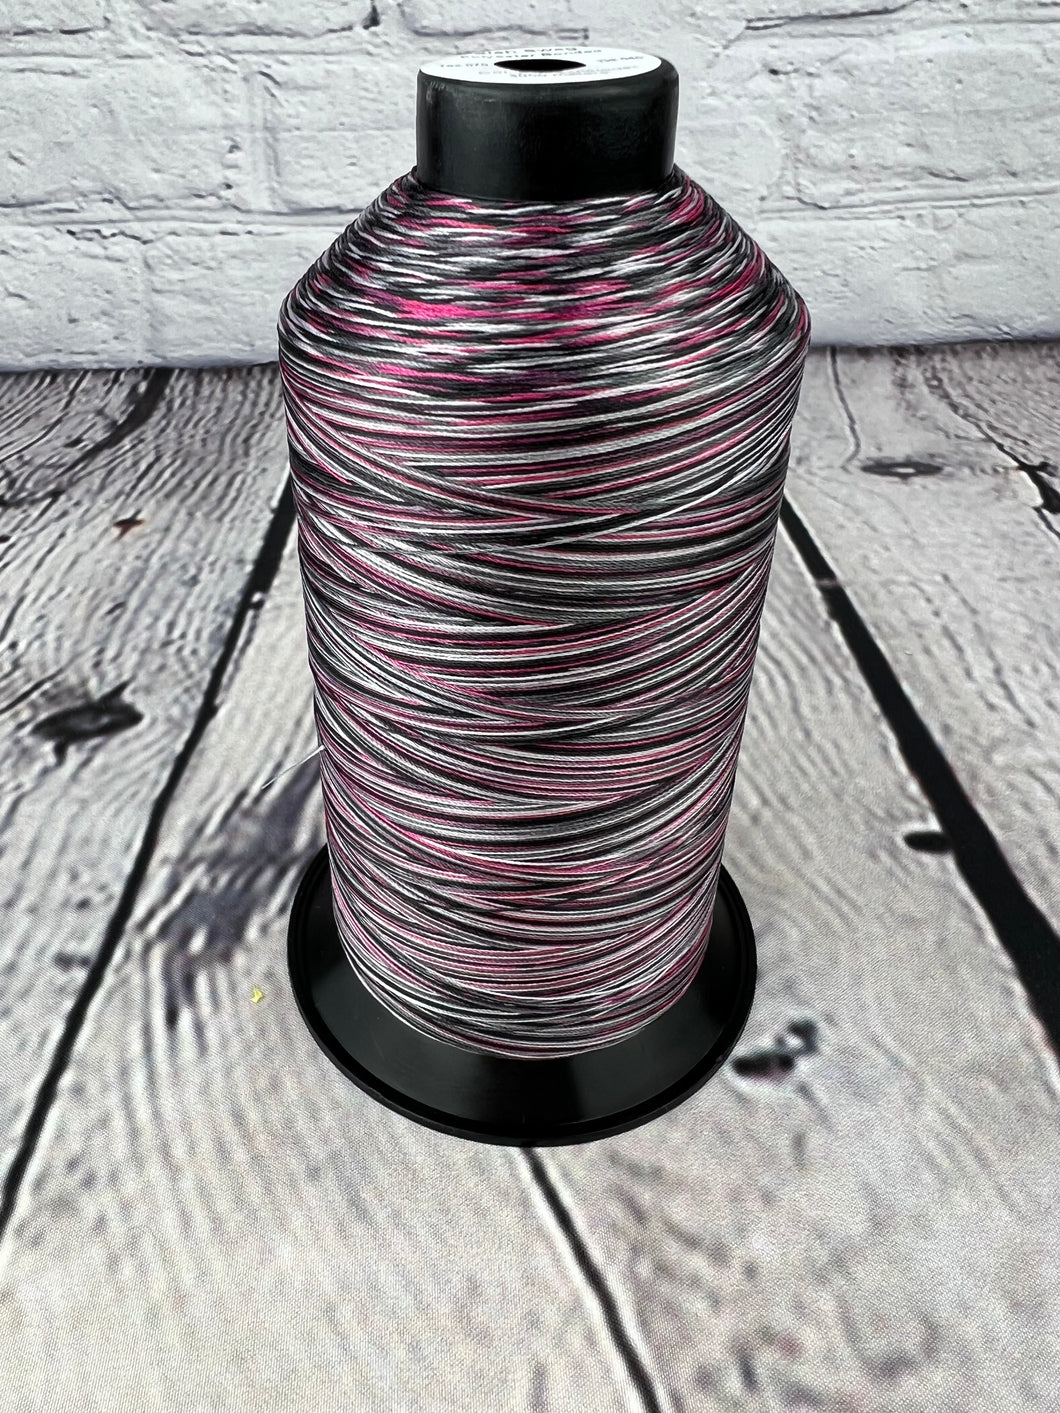 Swagalicous Variegated Thread